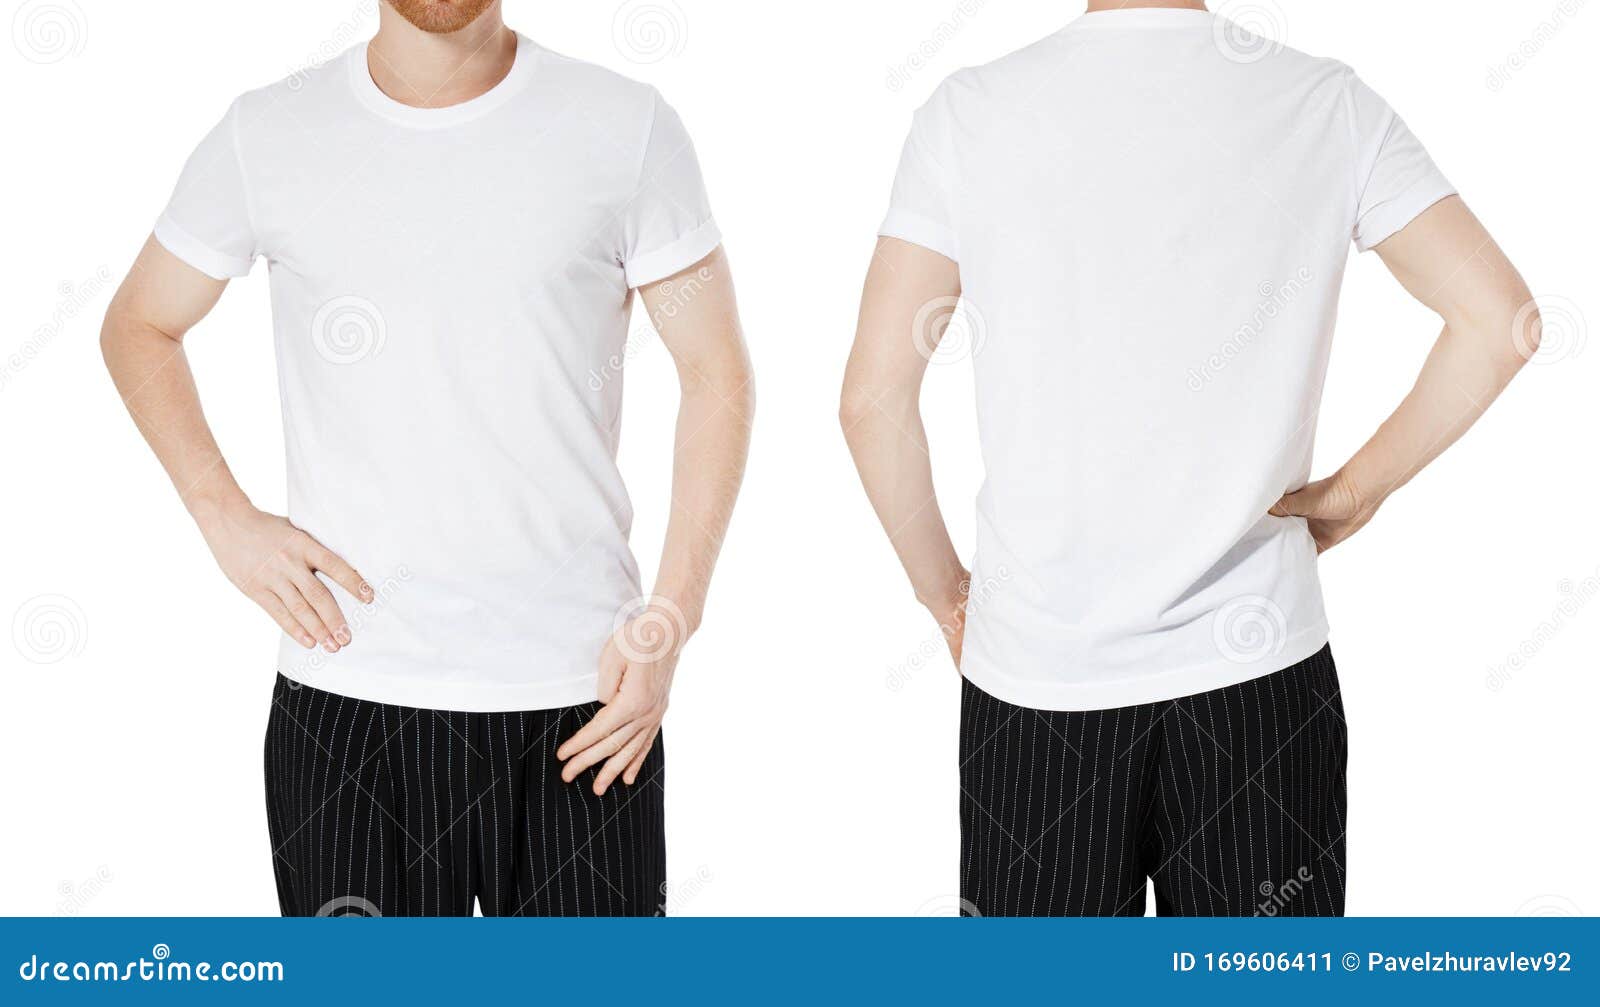 Download 2 059 White T Shirts Mockup Photos Free Royalty Free Stock Photos From Dreamstime PSD Mockup Templates